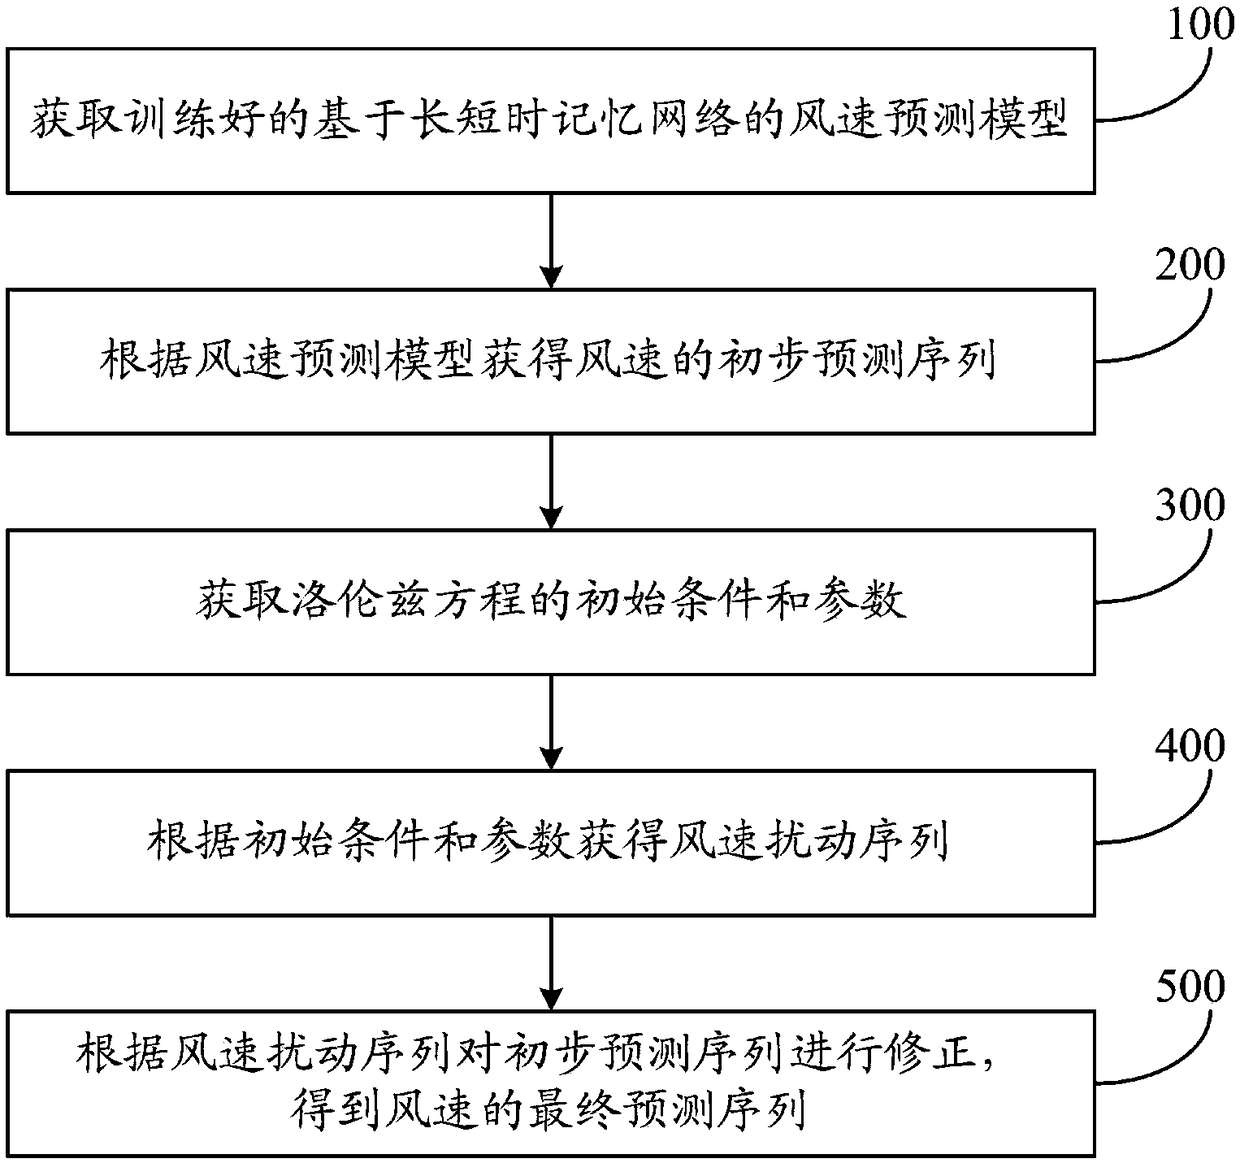 Method and system for wind speed prediction based on atmospheric disturbance